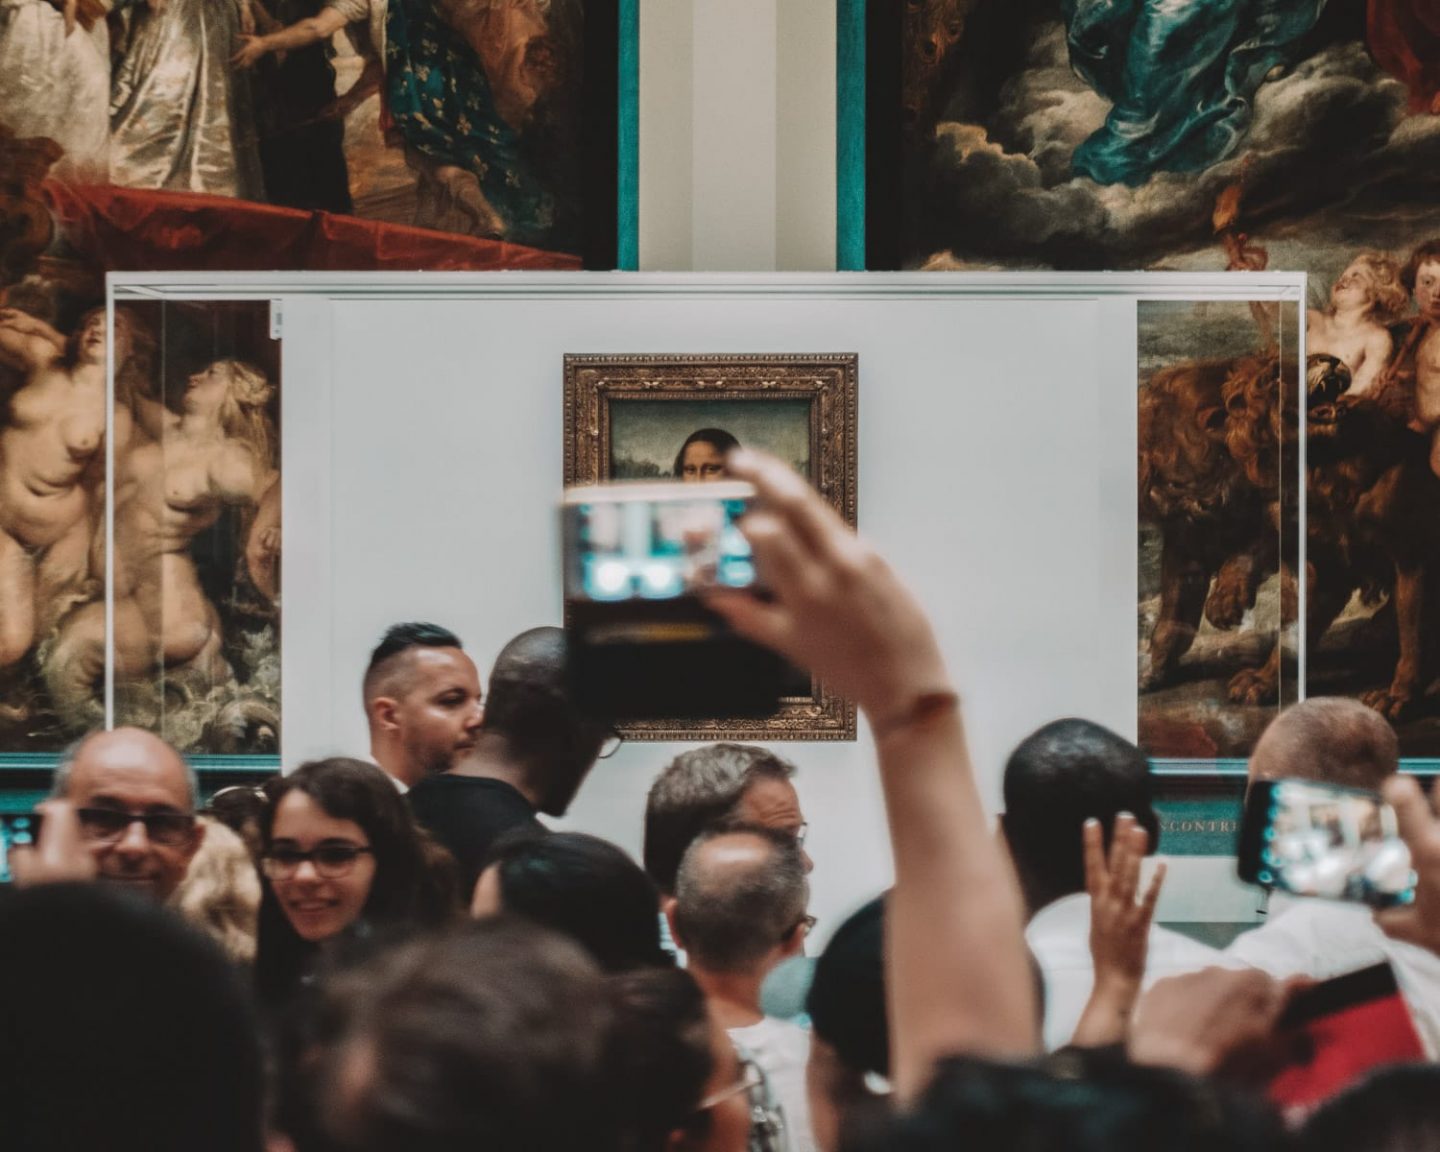 mona lisa in The Louvre